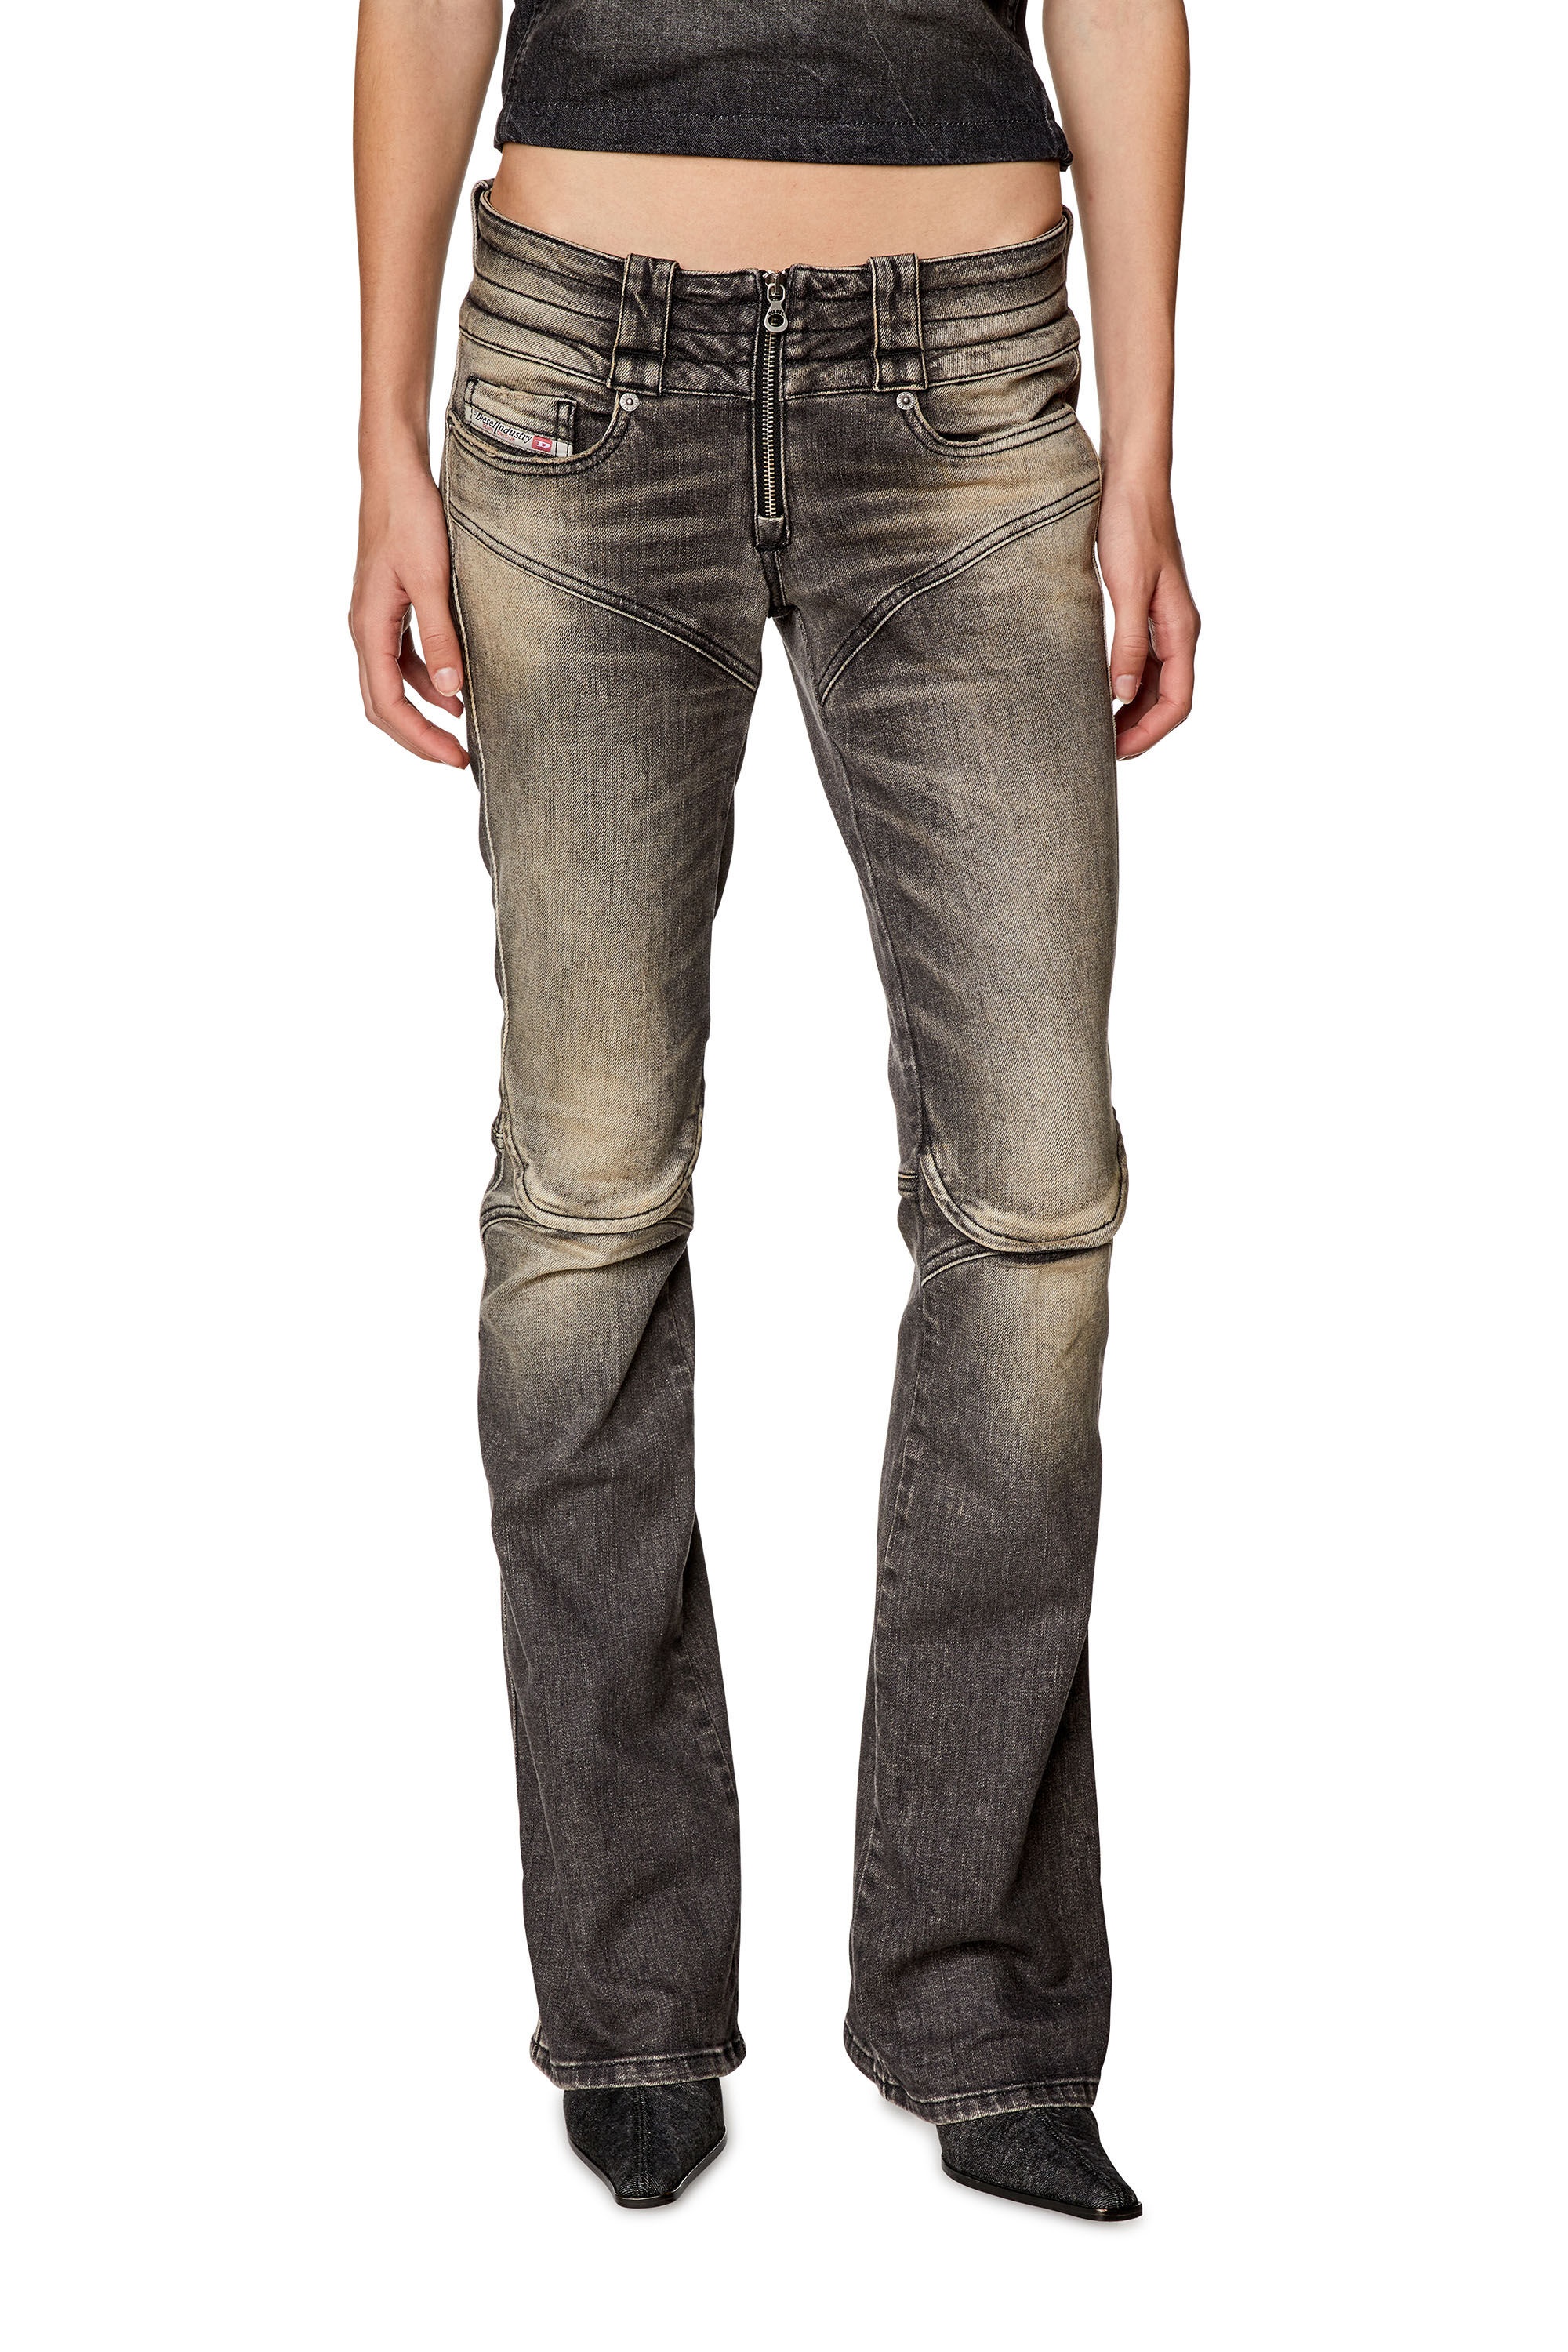 BOOTCUT AND FLARE JEANS BELTHY 0JGAL - 3